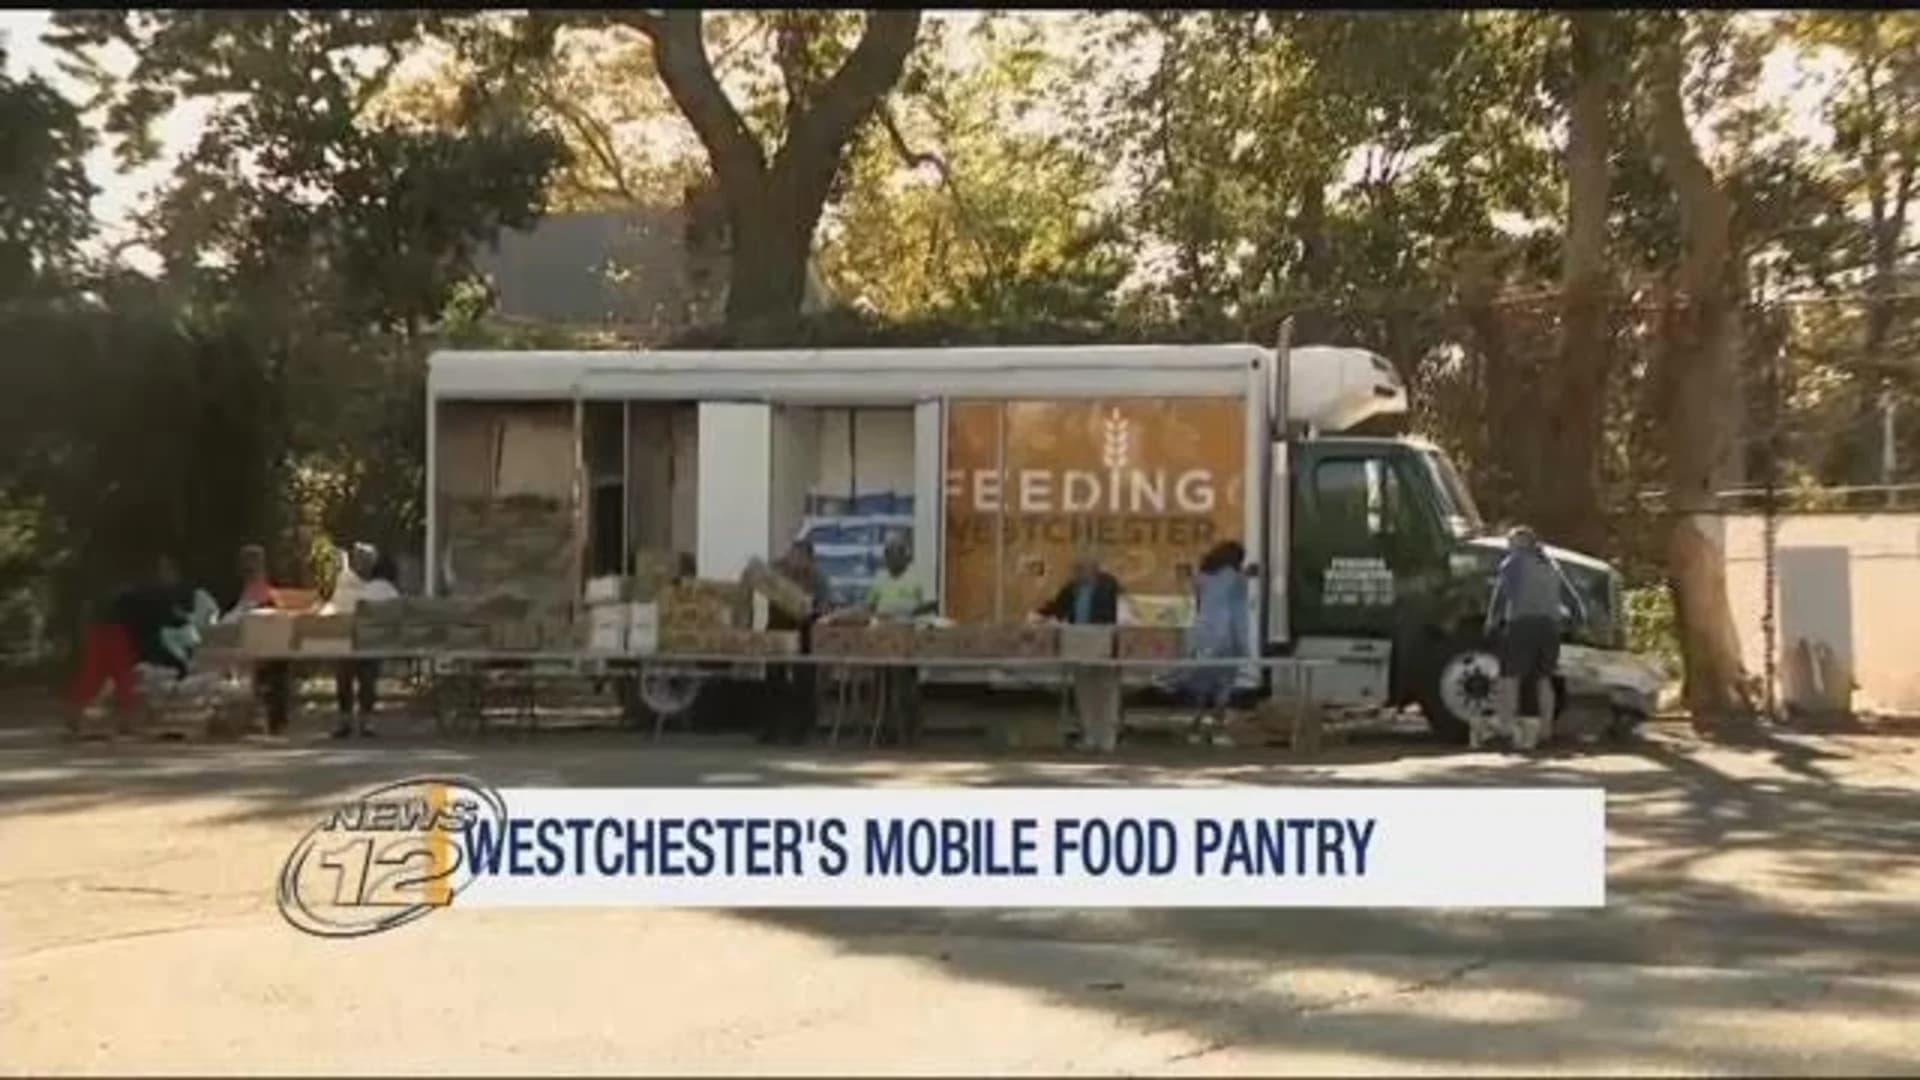 Westchester mobile food pantry serves up thousands of pounds of quality foods